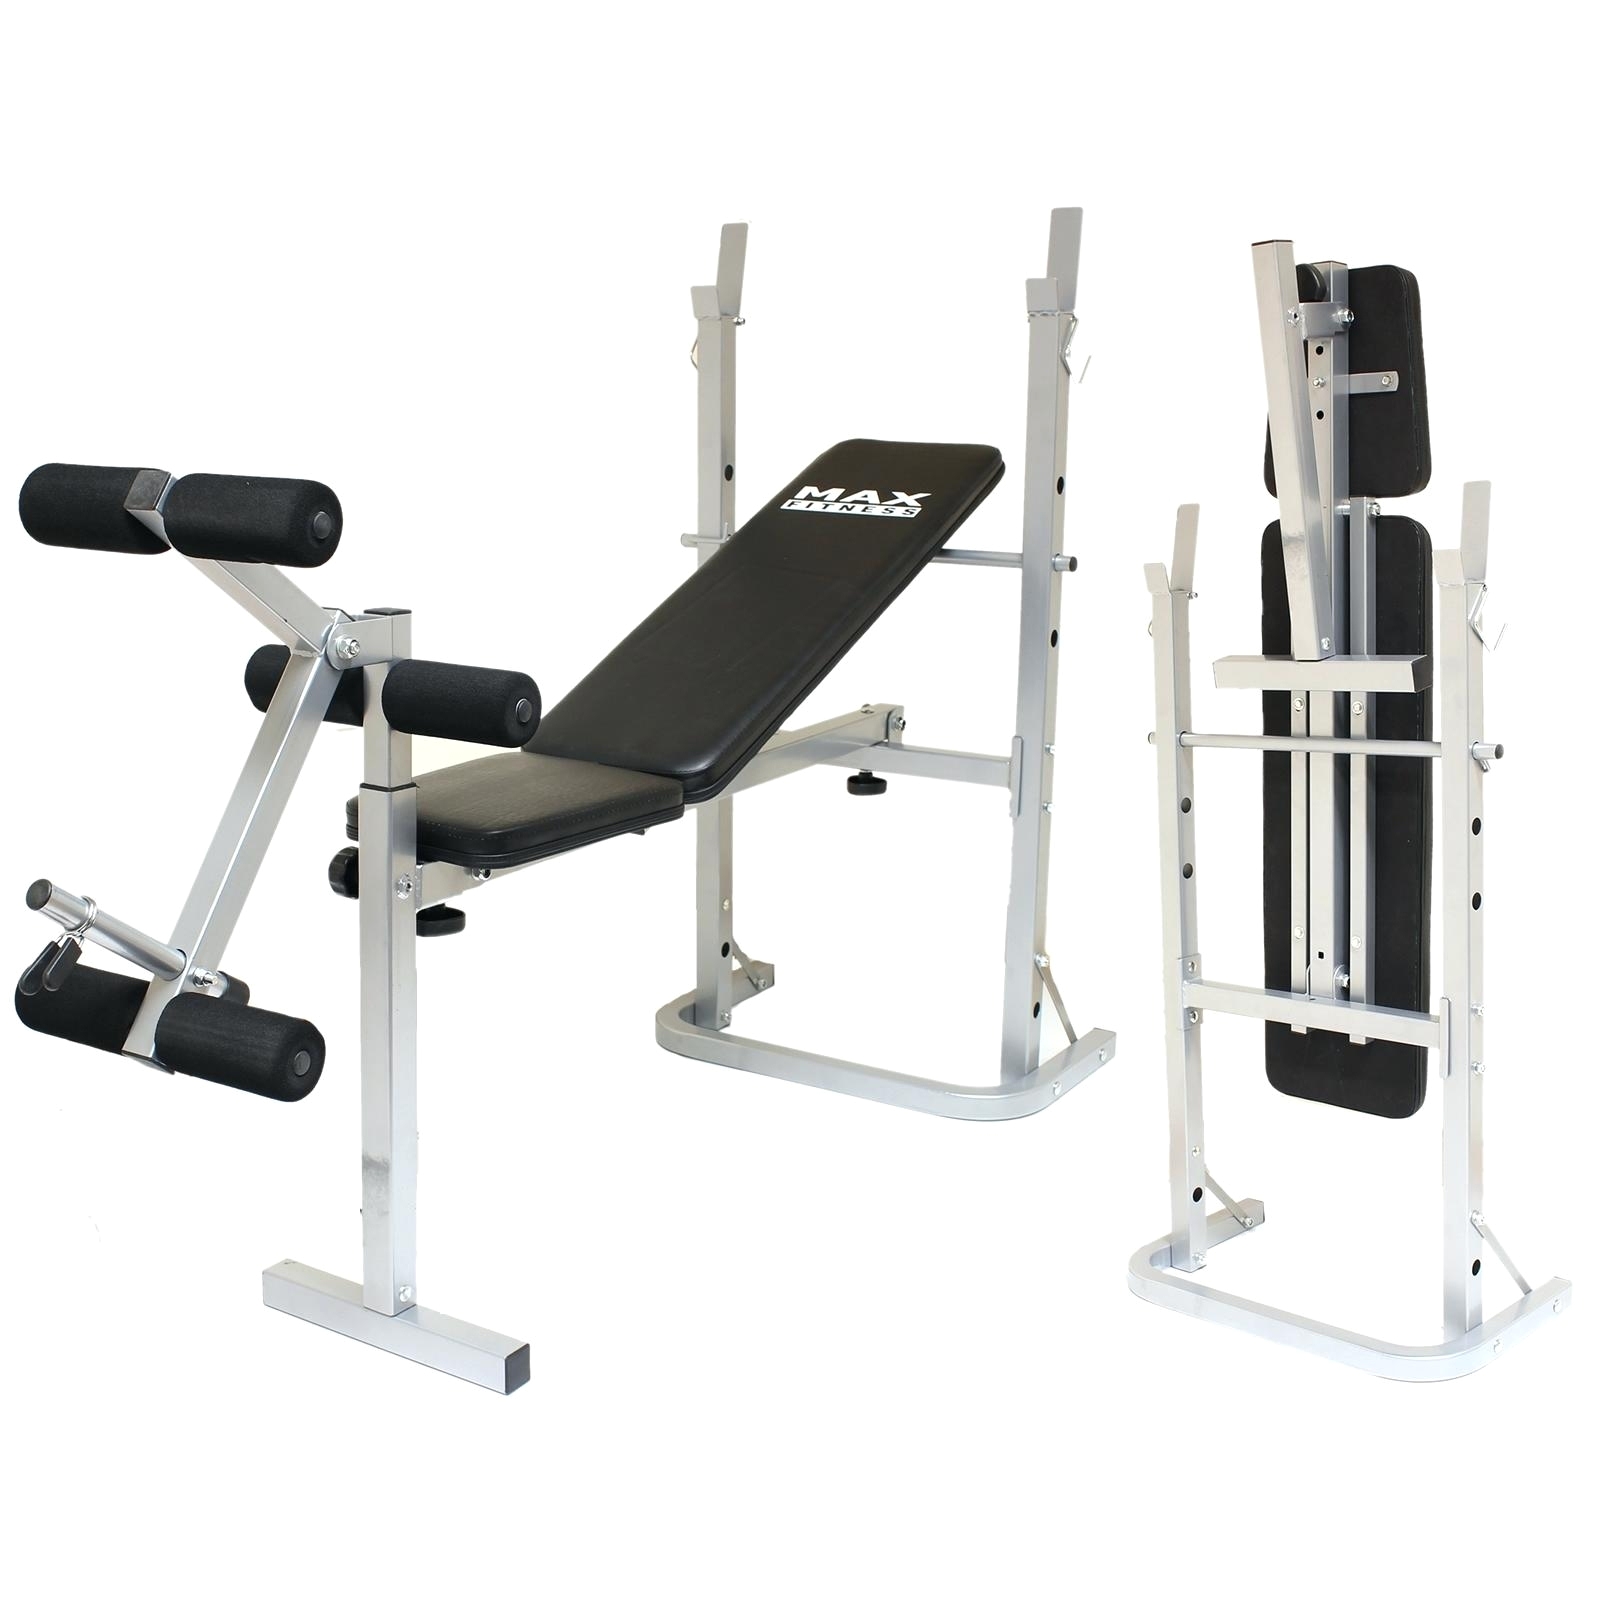 ideas kmart weight bench for safe and comfortable workout weight bench kmart